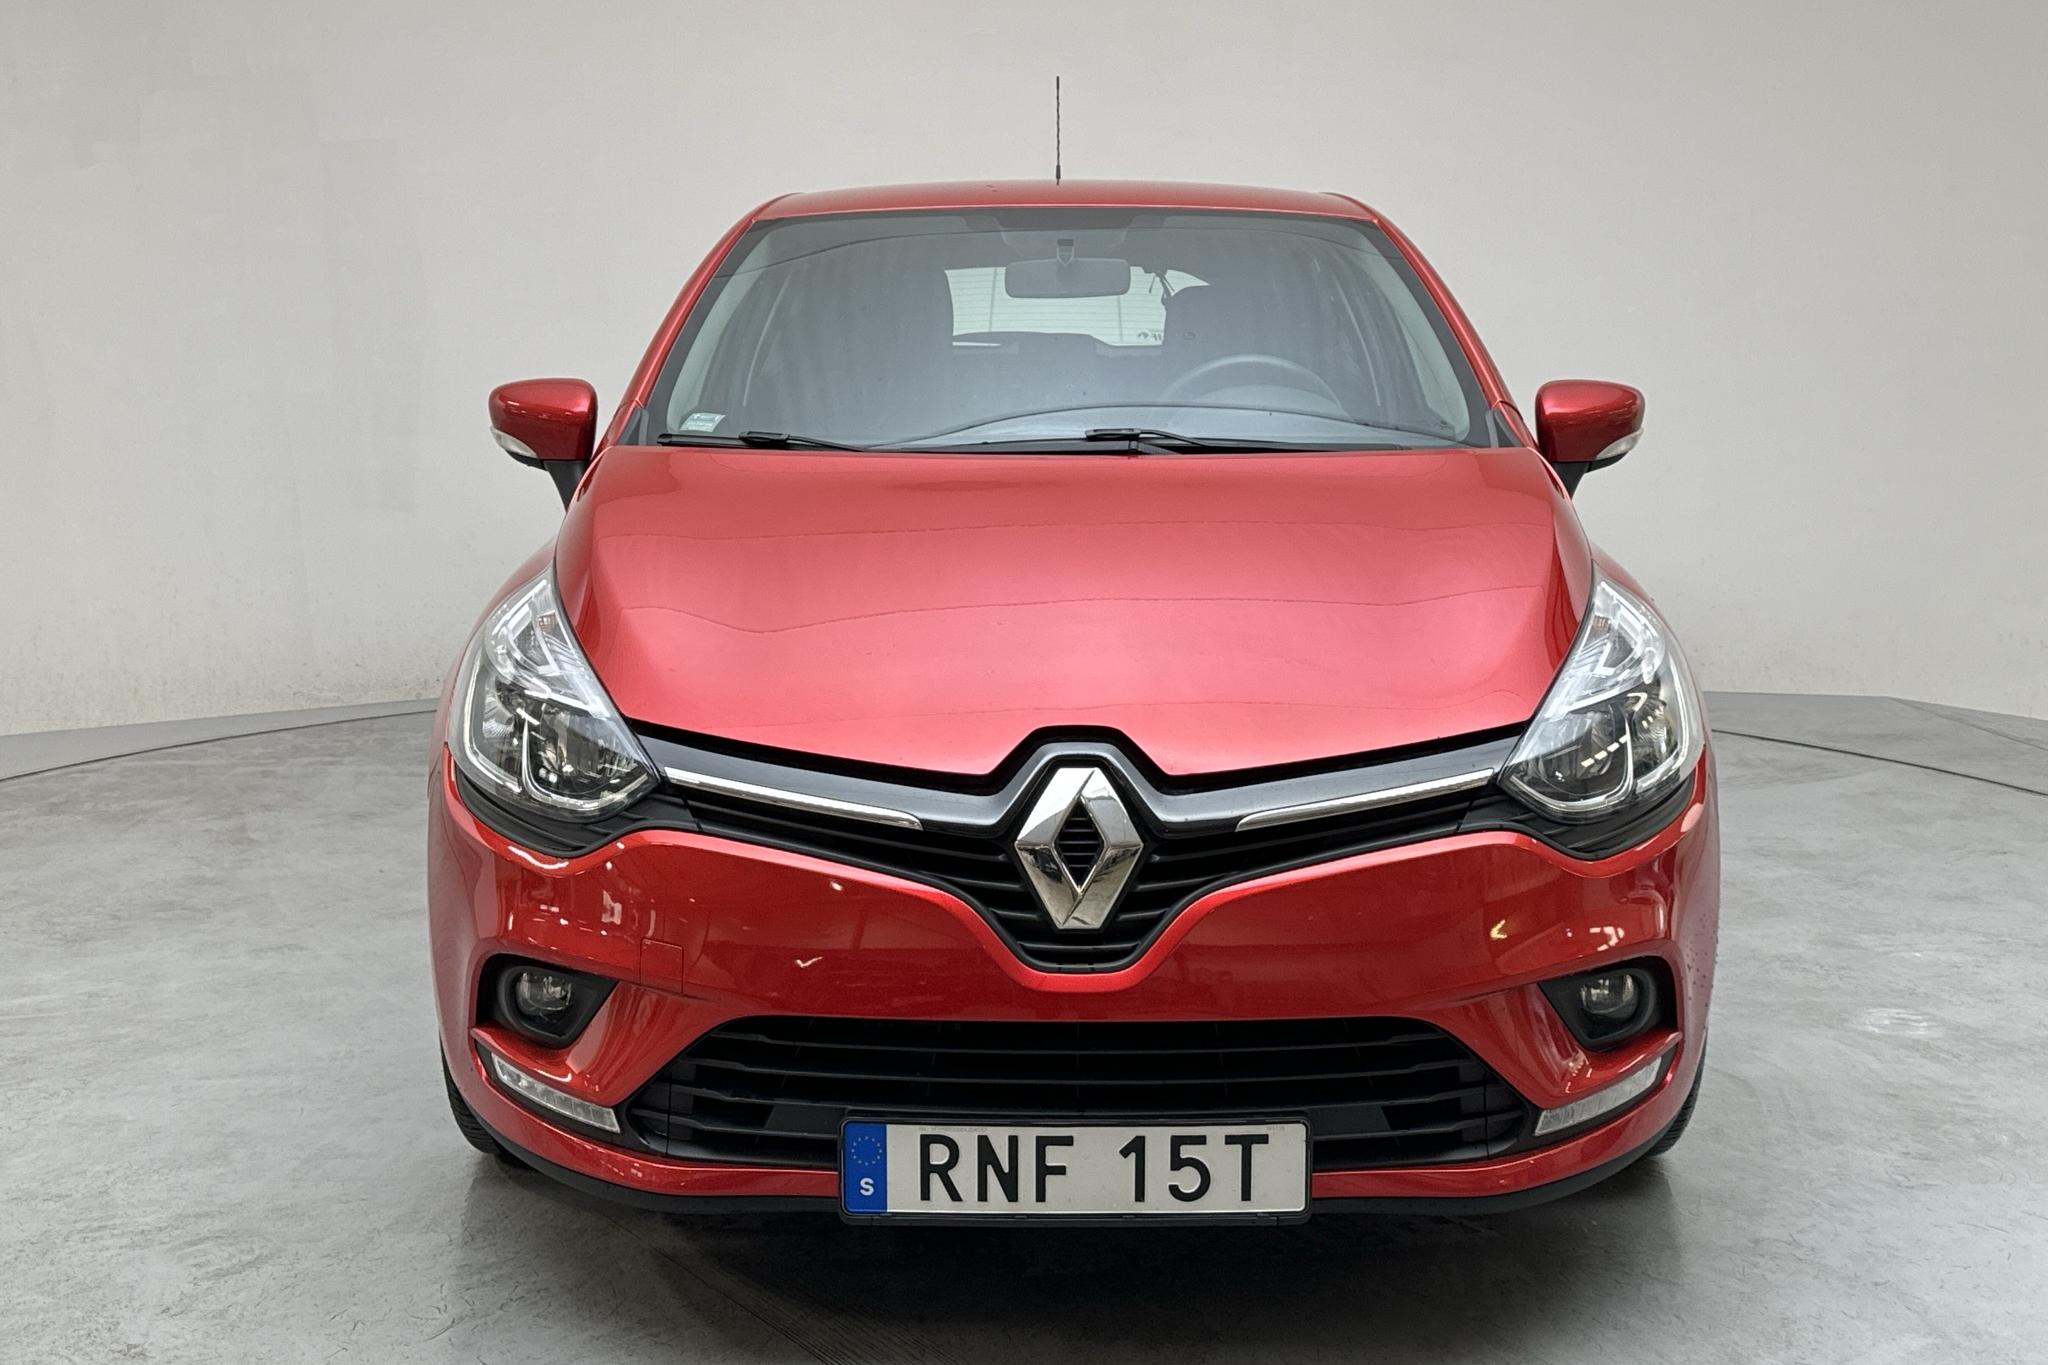 Renault Clio IV 0.9 TCe 90 5dr (90hk) - 70 000 km - Manual - red - 2020